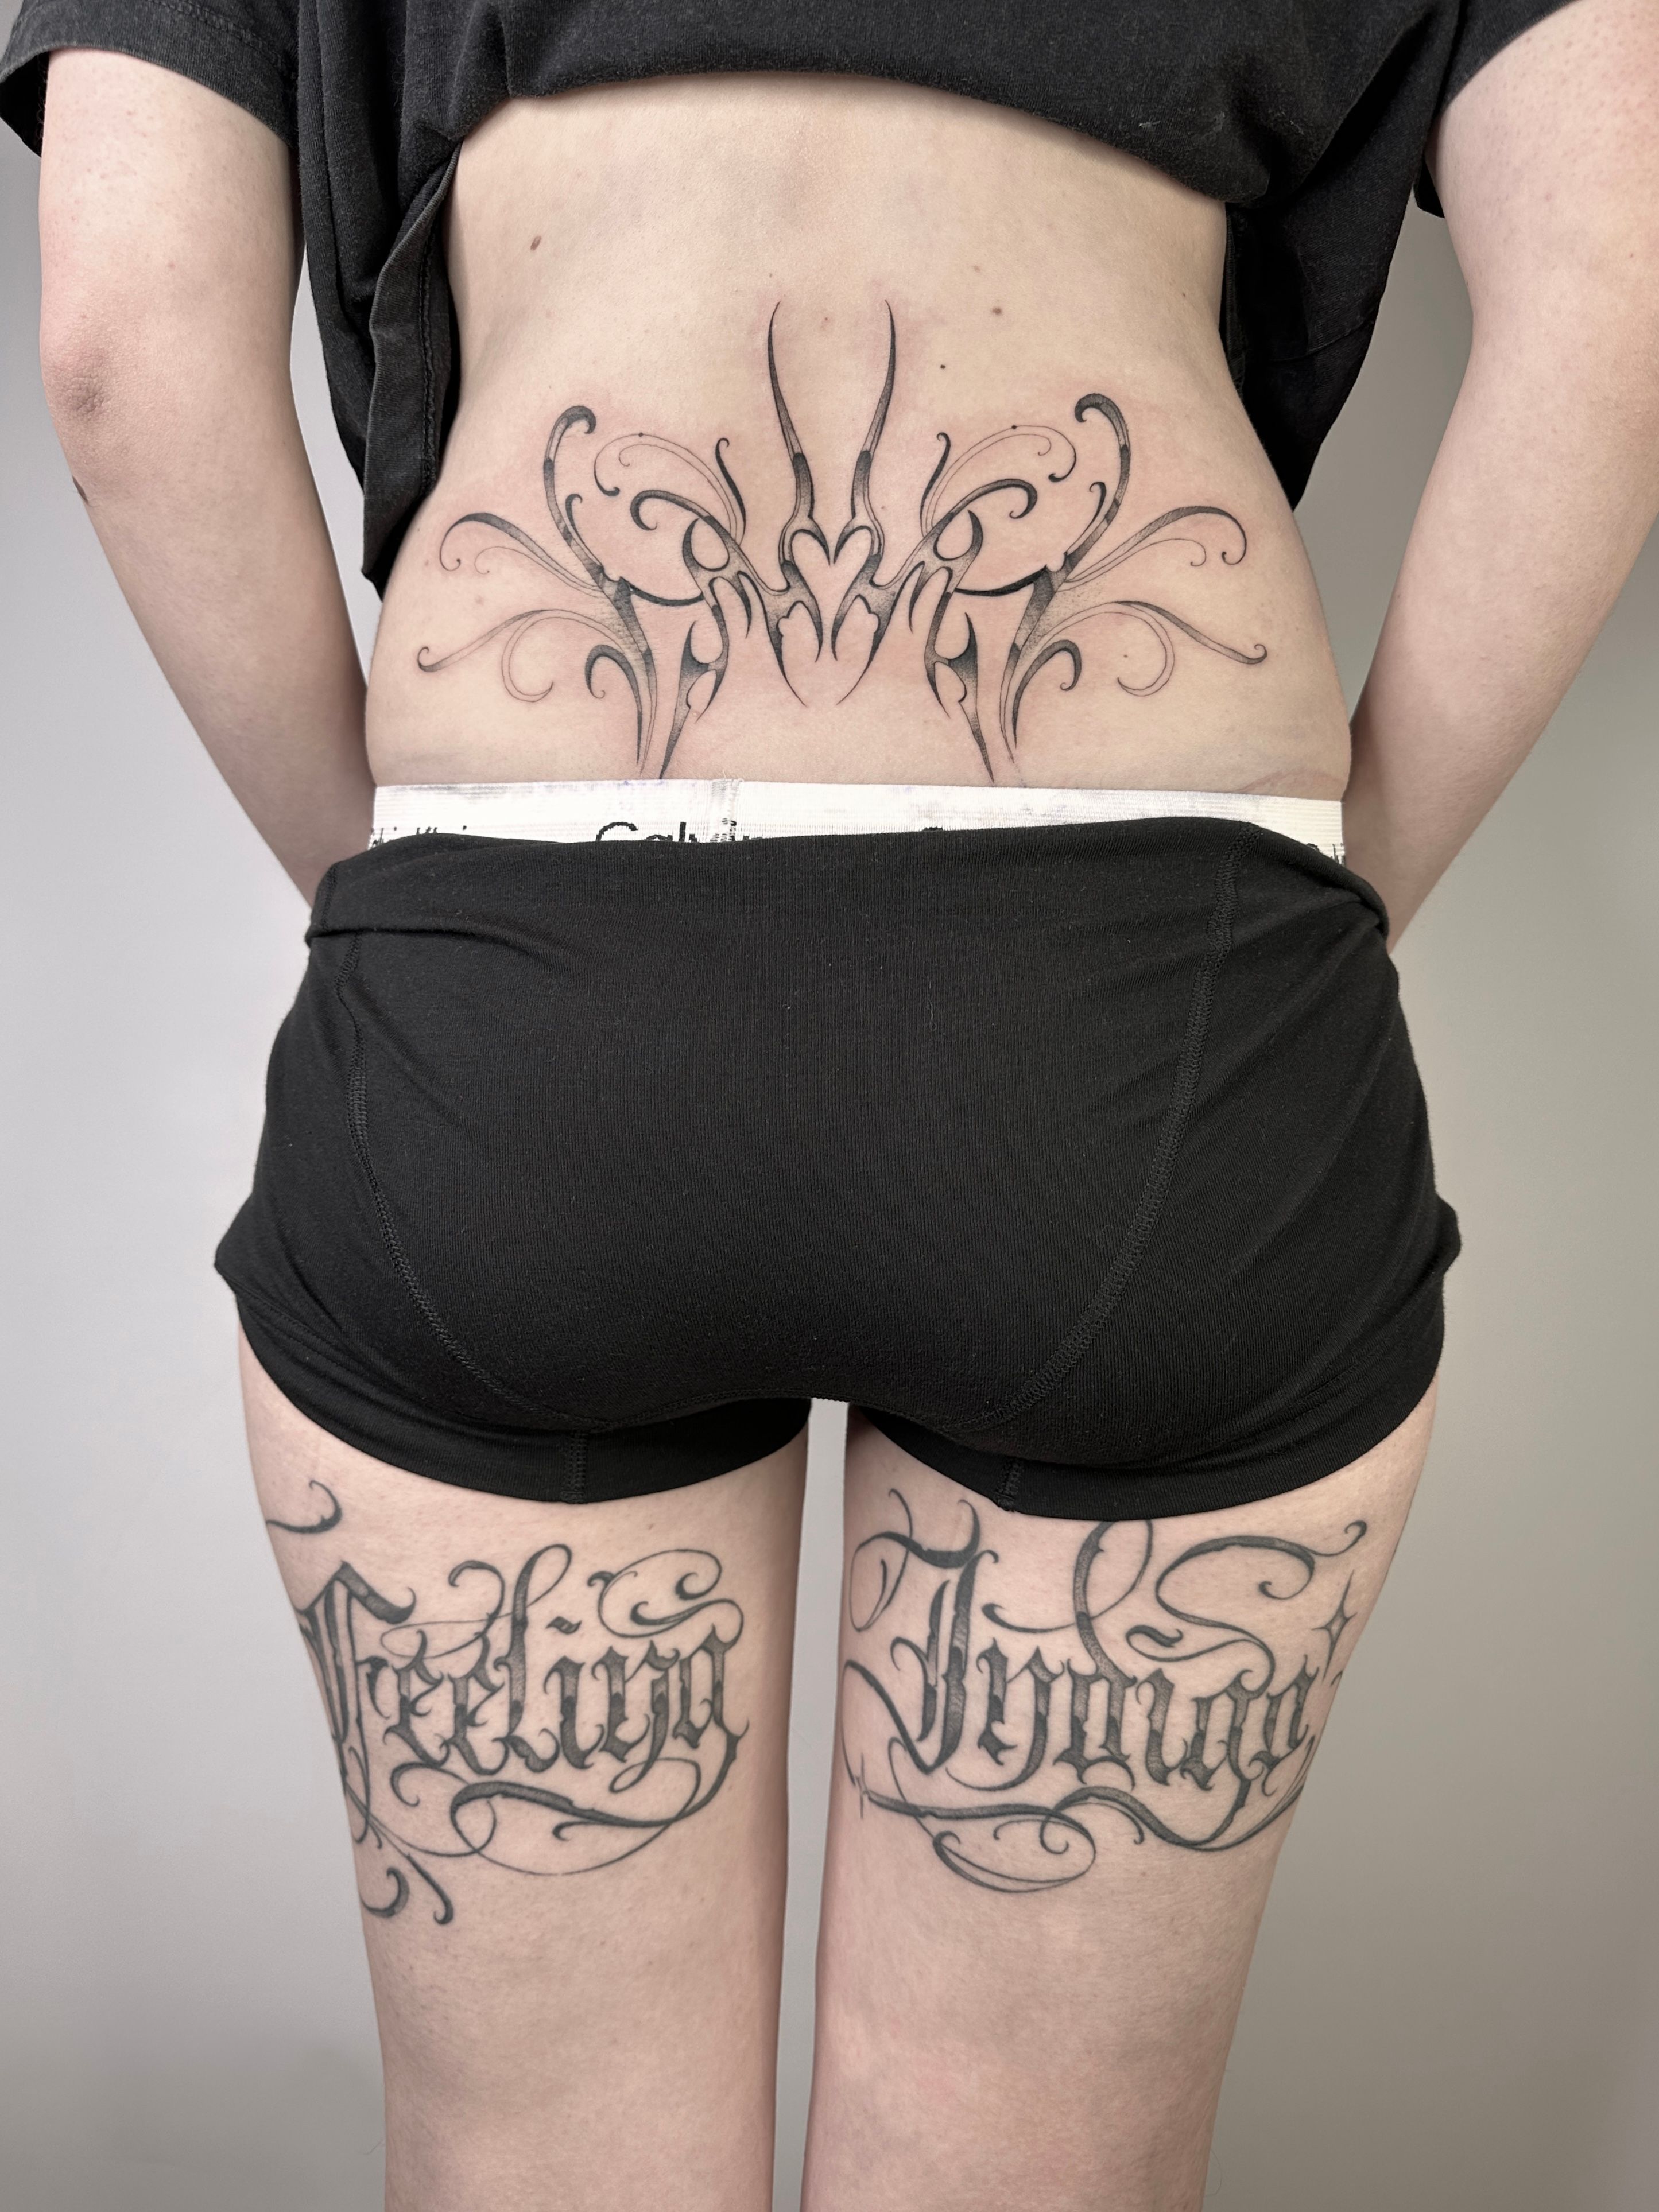 tramp stamp' in Tattoos • Search in +1.3M Tattoos Now • Tattoodo